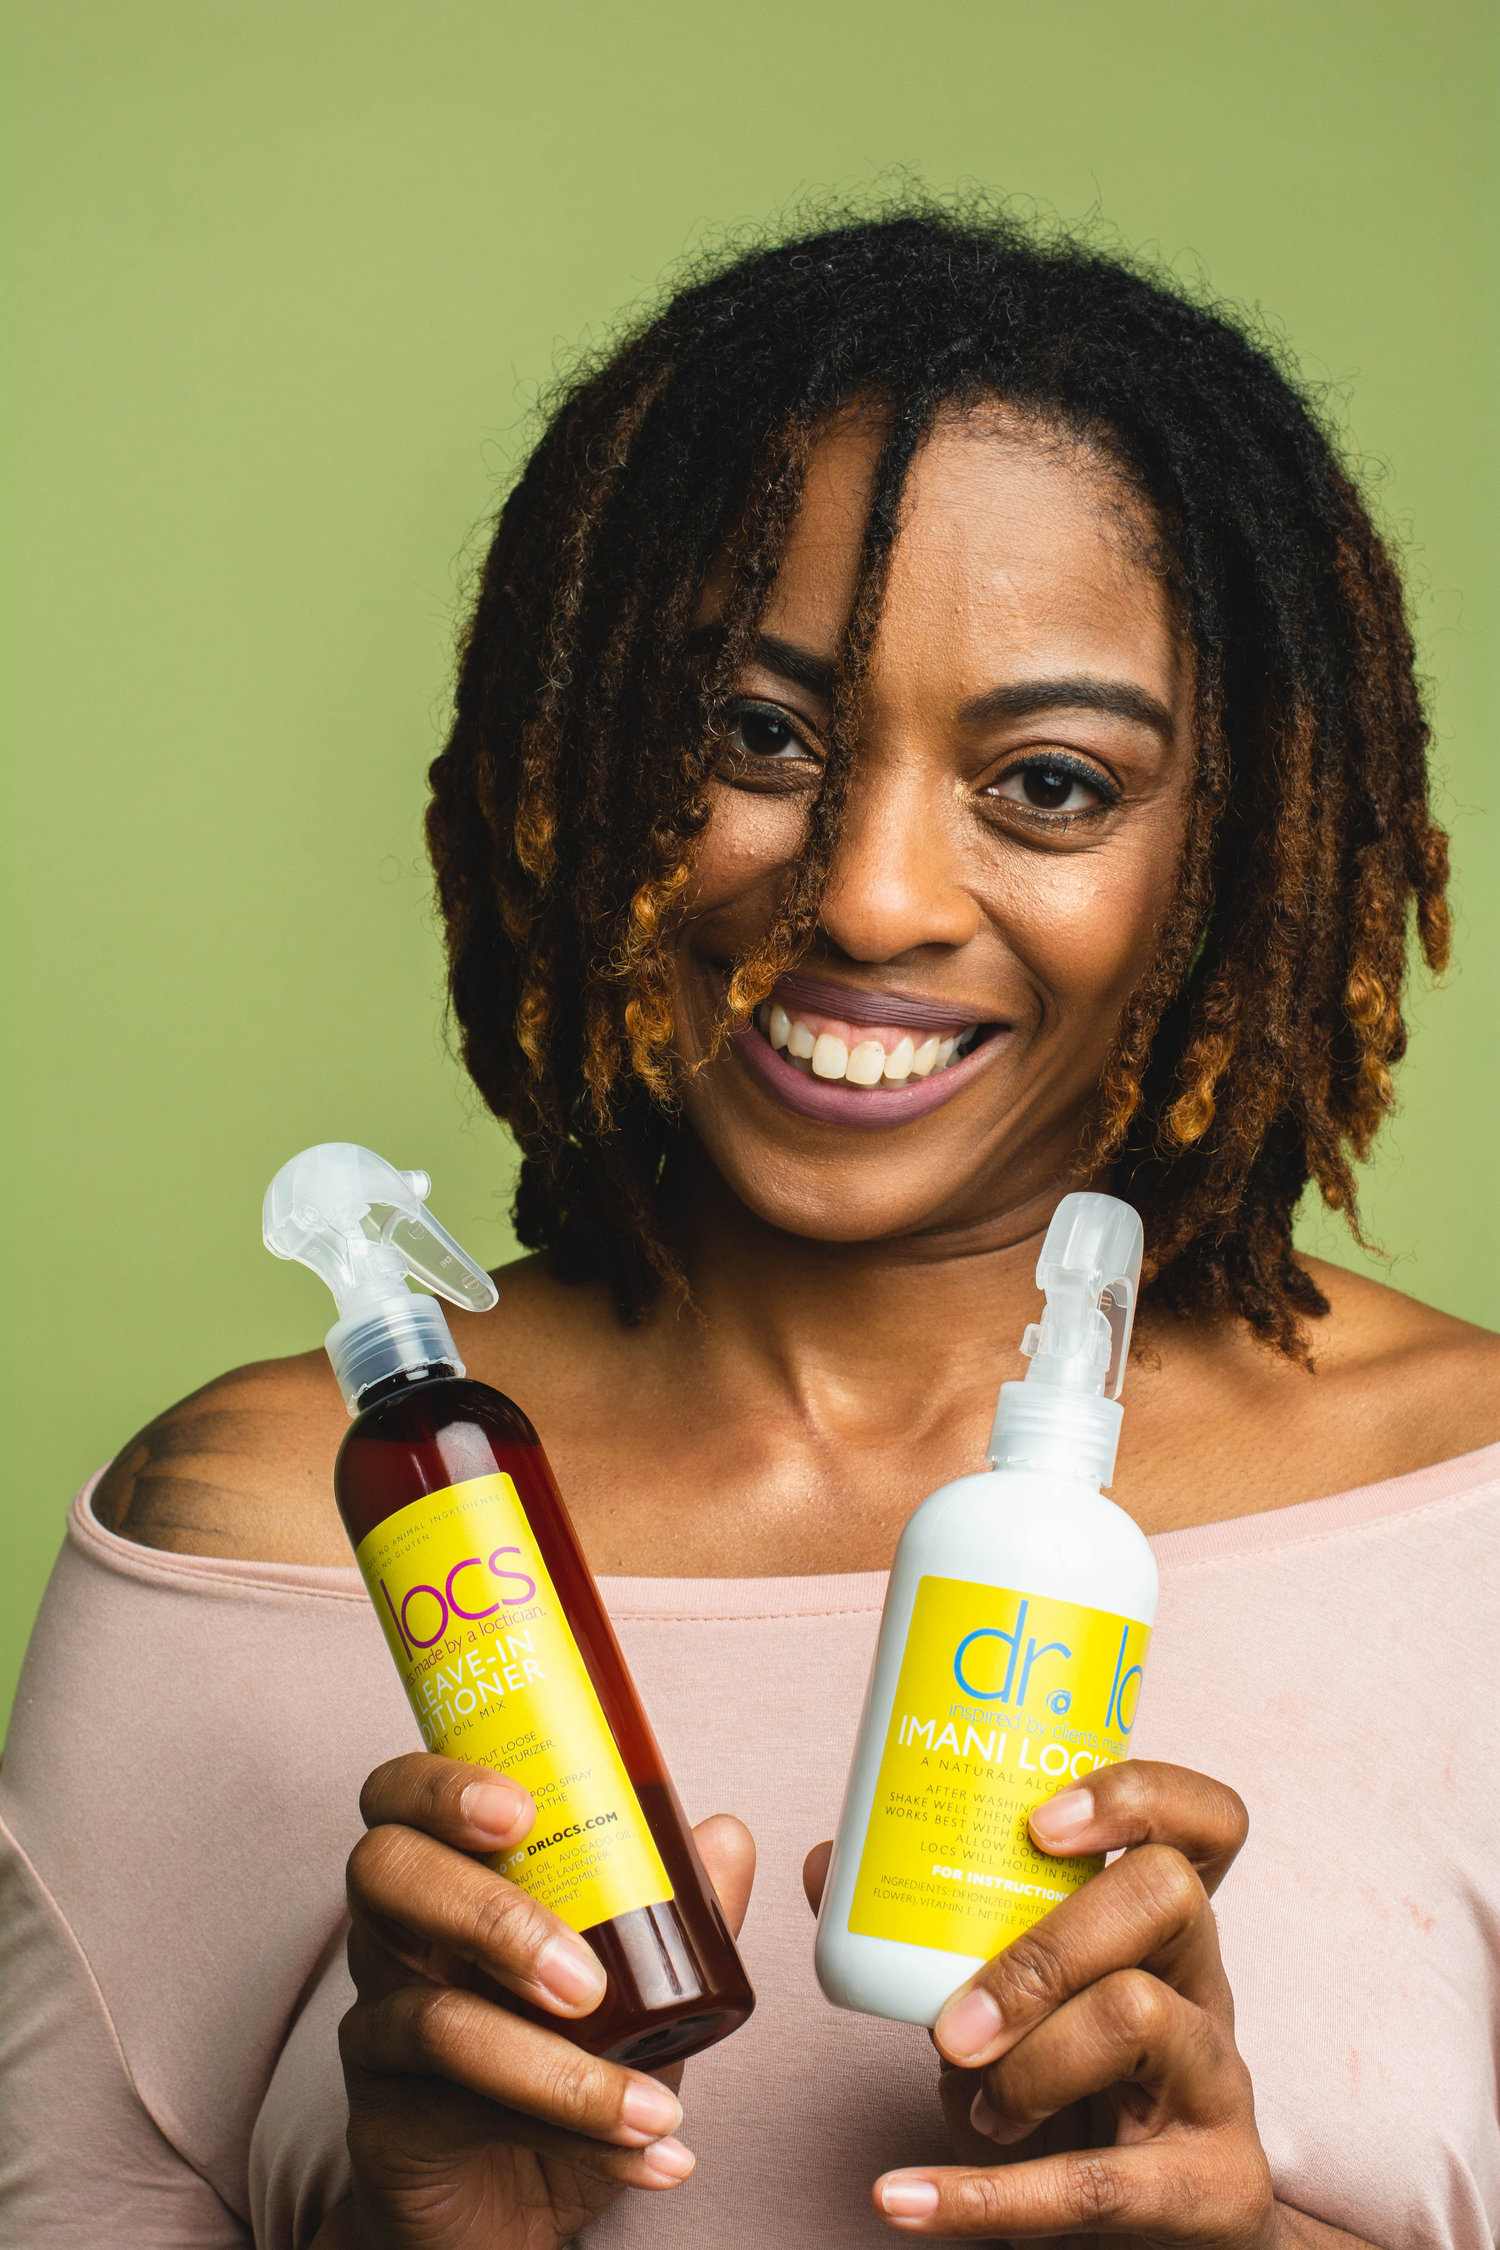 Dr Locs Homemade Products For Locs And Dreds Created By A